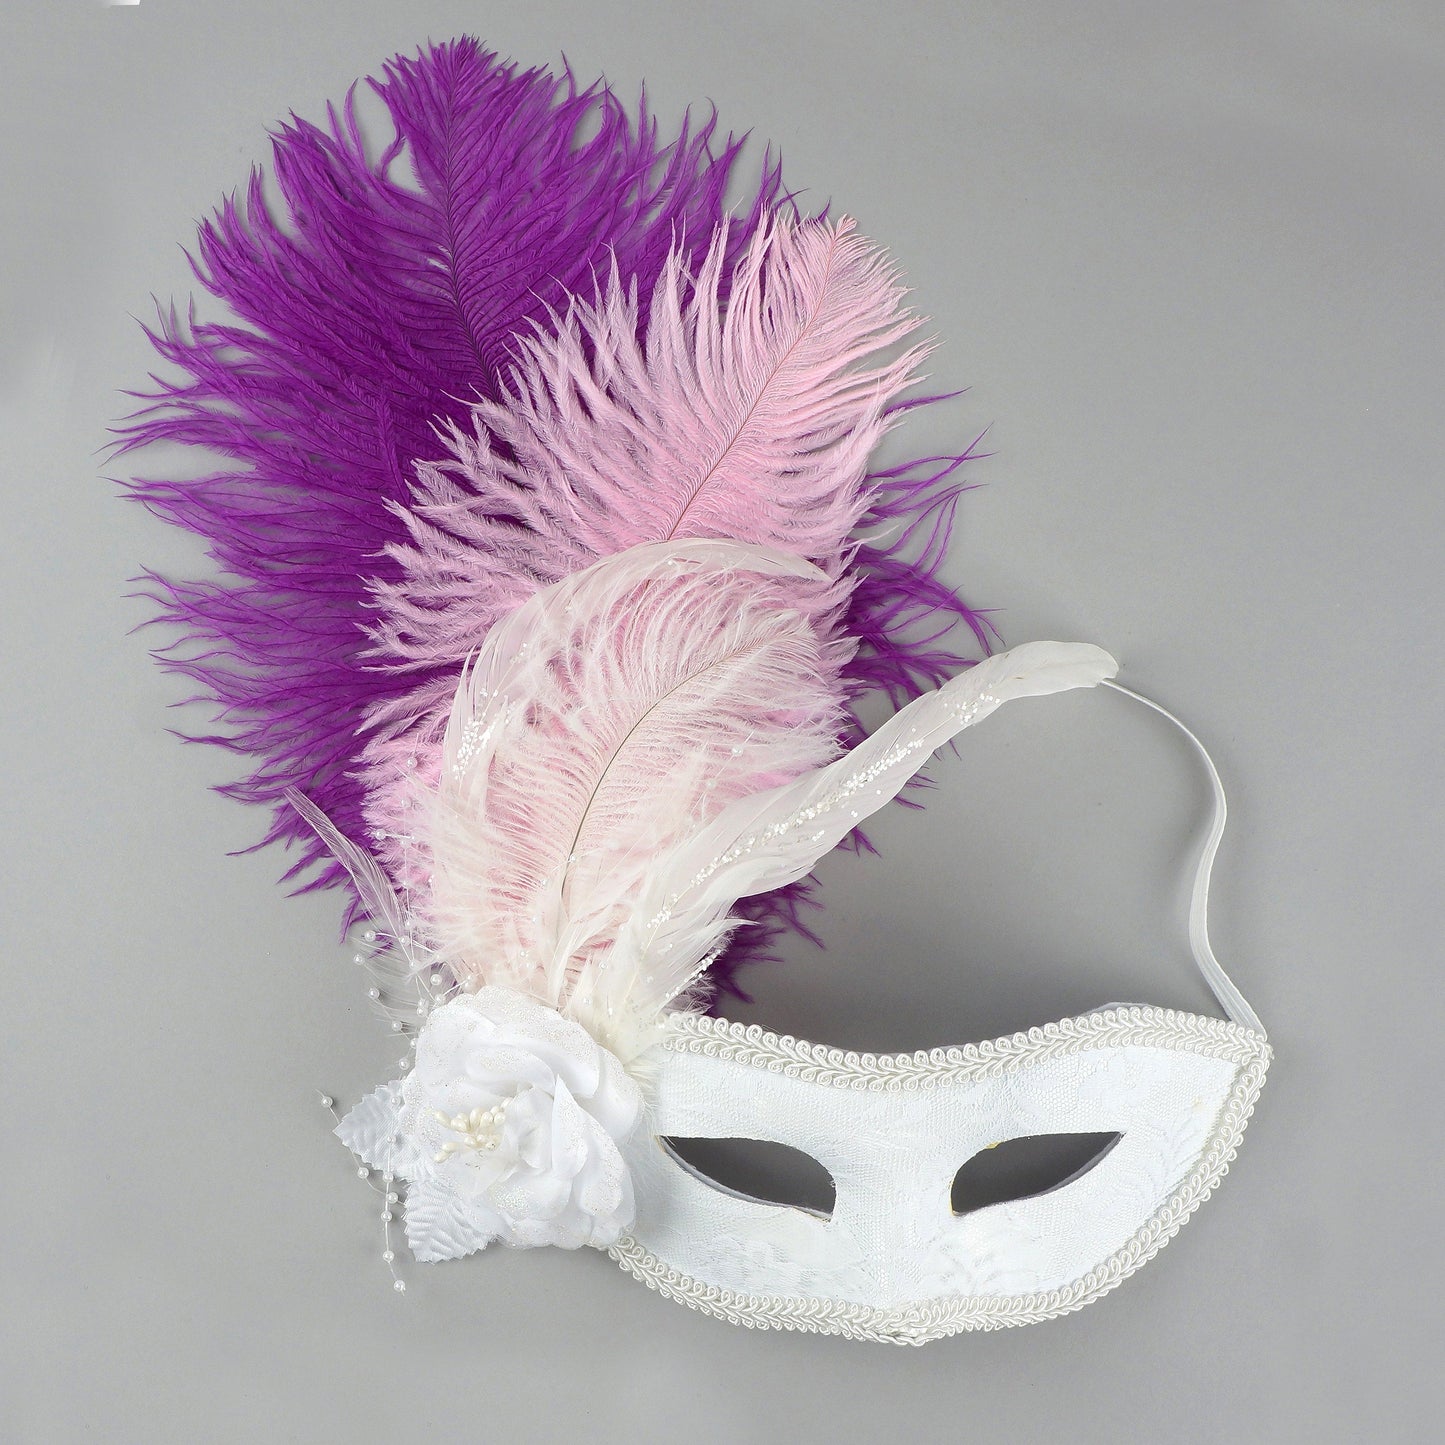 Ostrich Feathers 9-12" Drabs - Very Berry